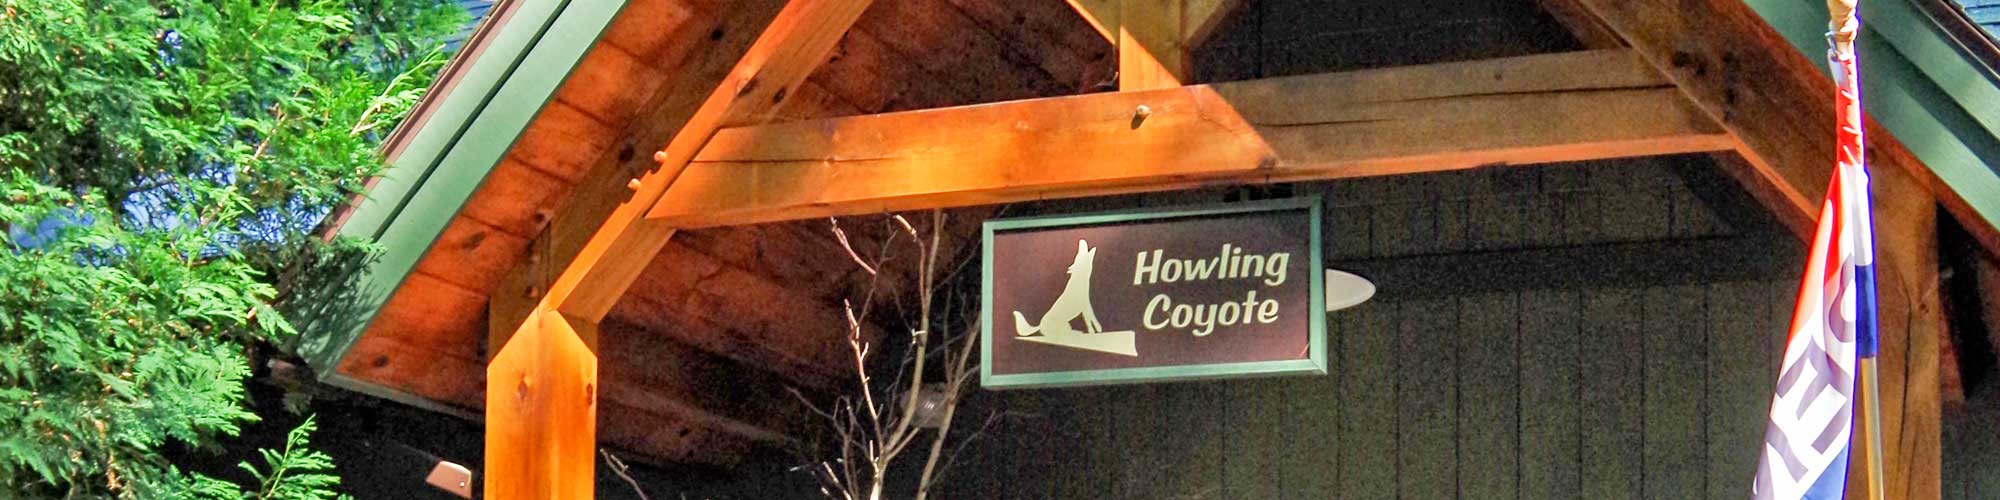 Entrance to the Howling Coyote Gift Shop